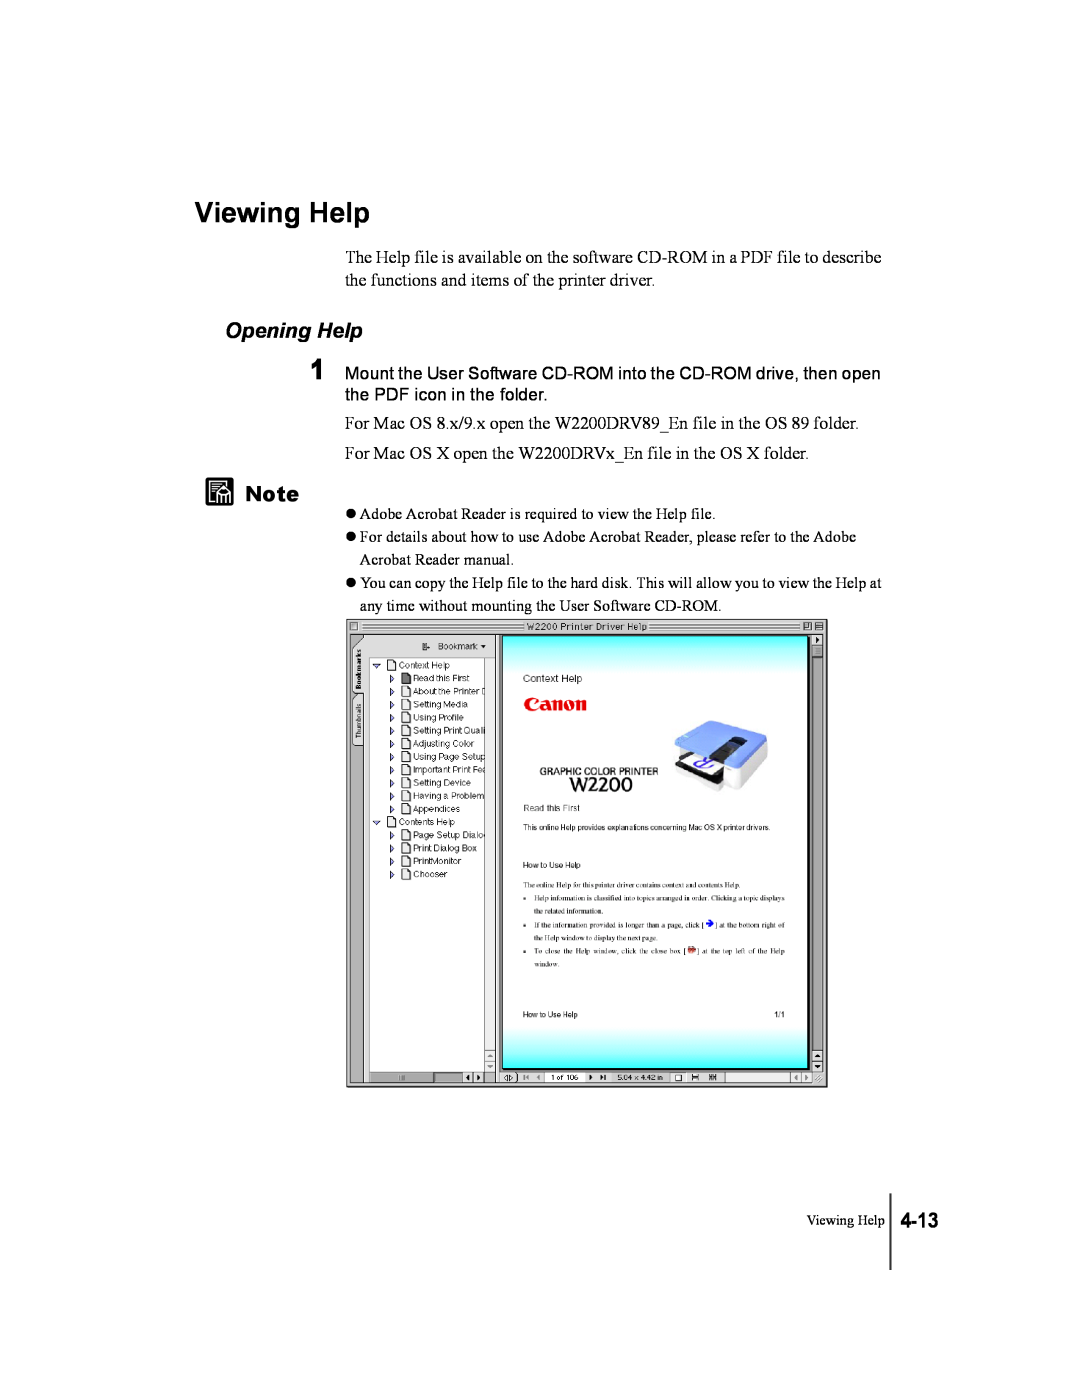 Canon W2200 manual Viewing Help, Opening Help, 4-13 